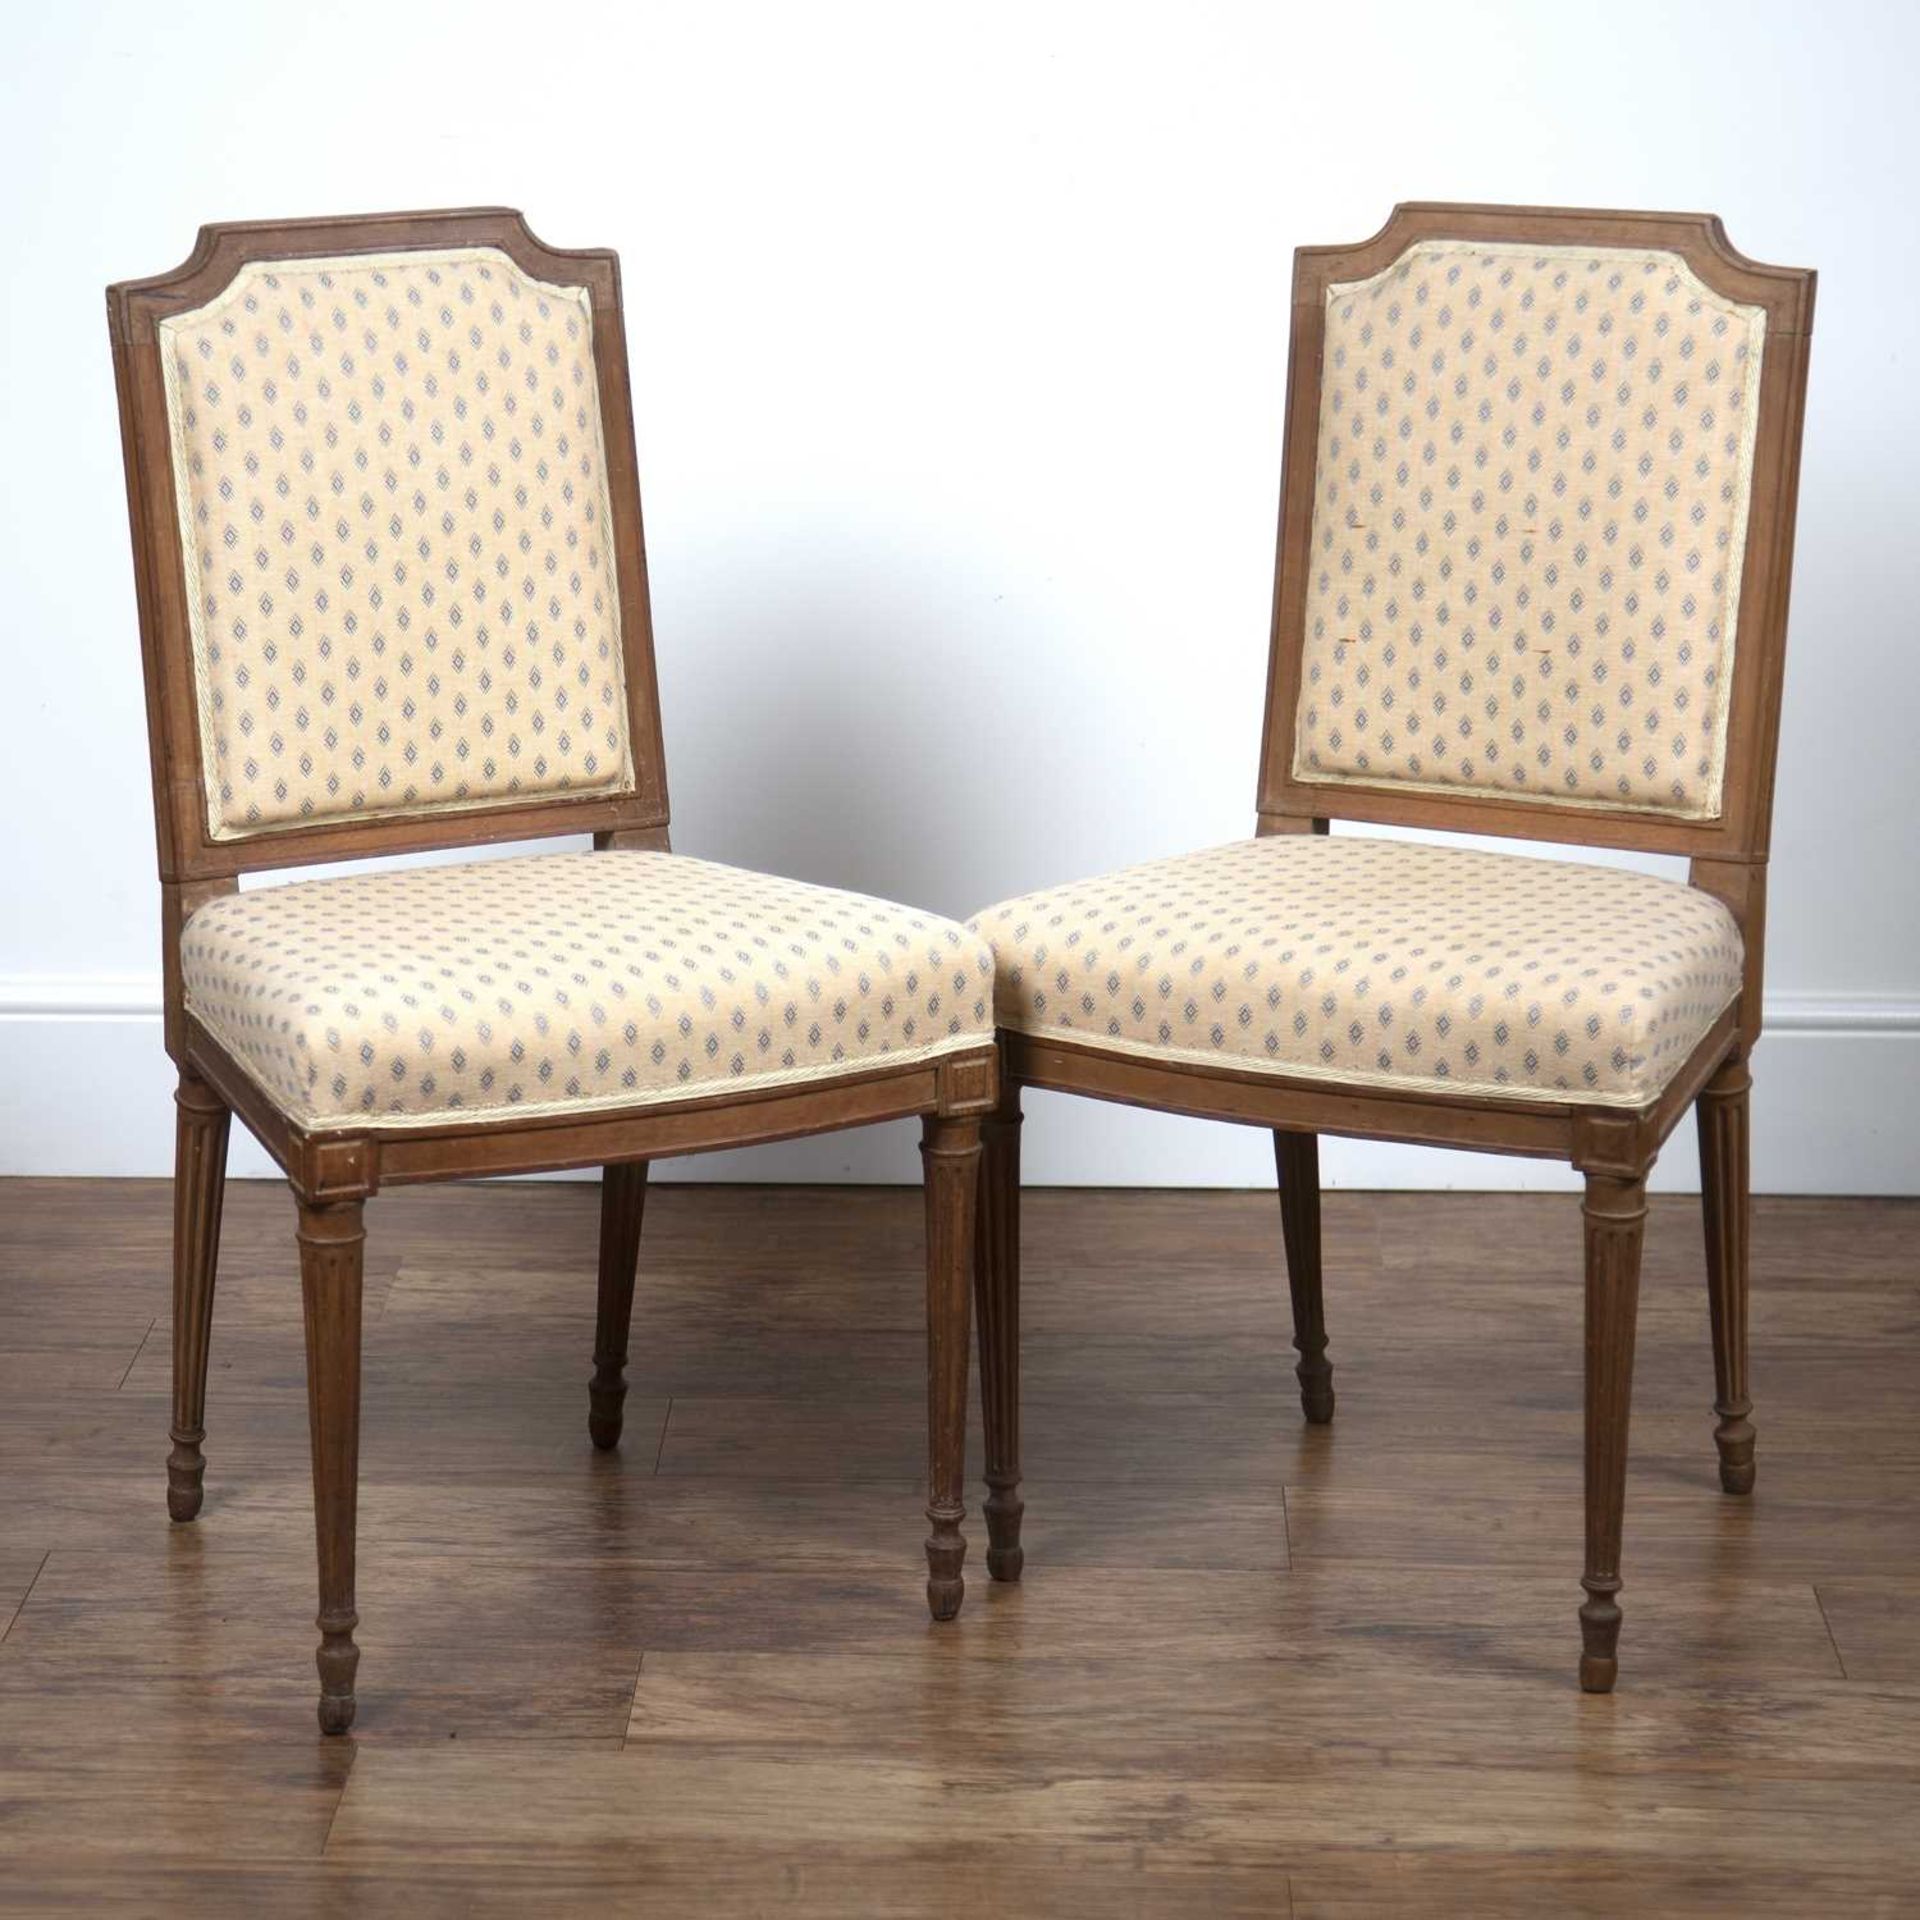 Set of four French Louis XVI style chairs with cream and blue upholstery on reeded legs, 90.5cm high - Image 3 of 3